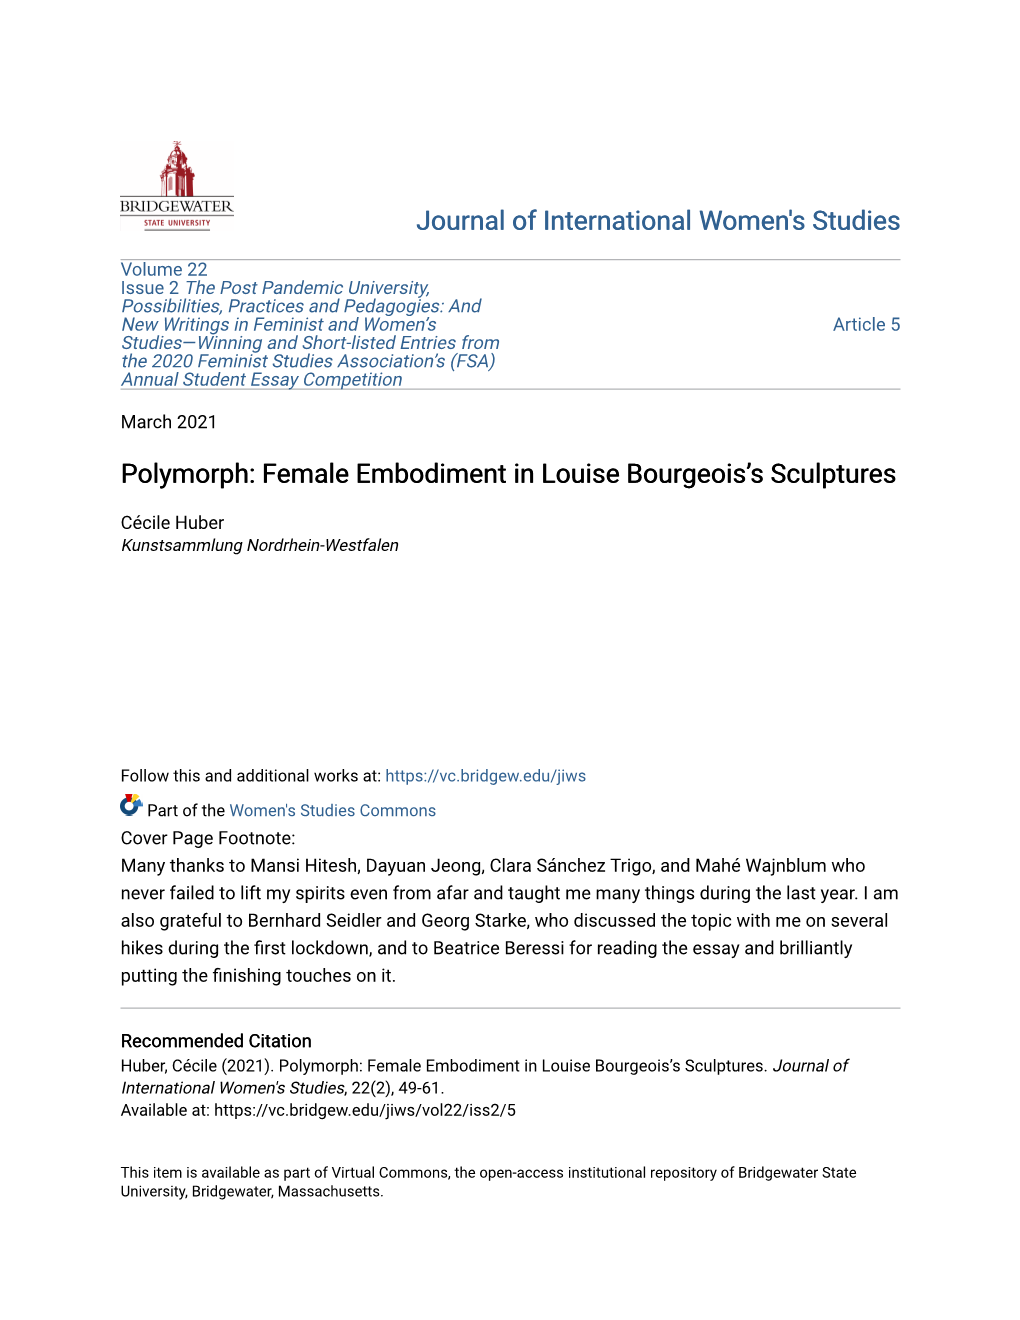 Polymorph: Female Embodiment in Louise Bourgeois's Sculptures